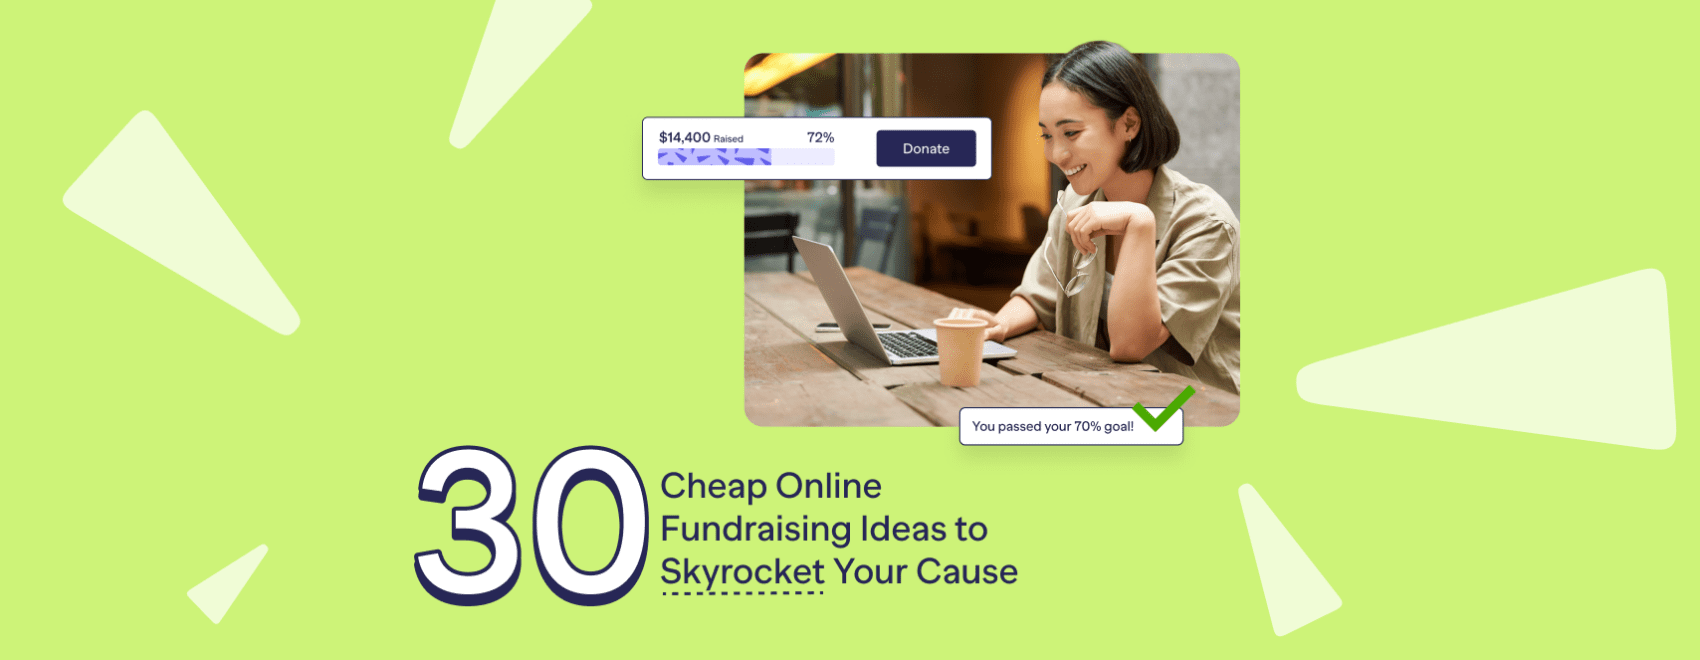 30 Cheap Online Fundraising Ideas to Skyrocket Your Cause